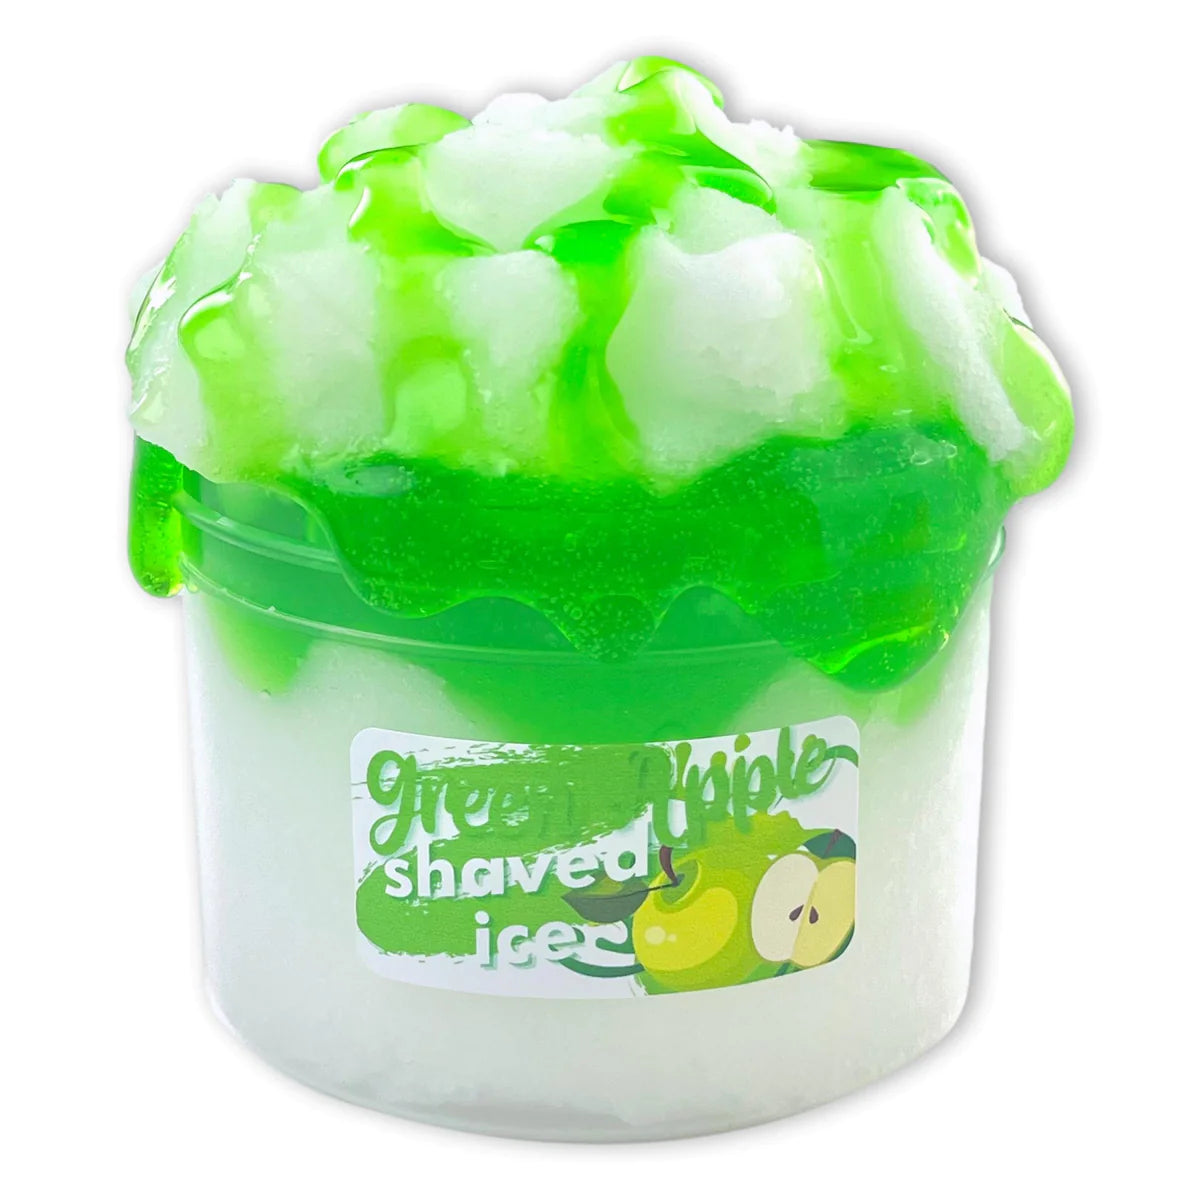 Green Apple Shaved Ice Slime by Dope Slimes #WS2GA5228